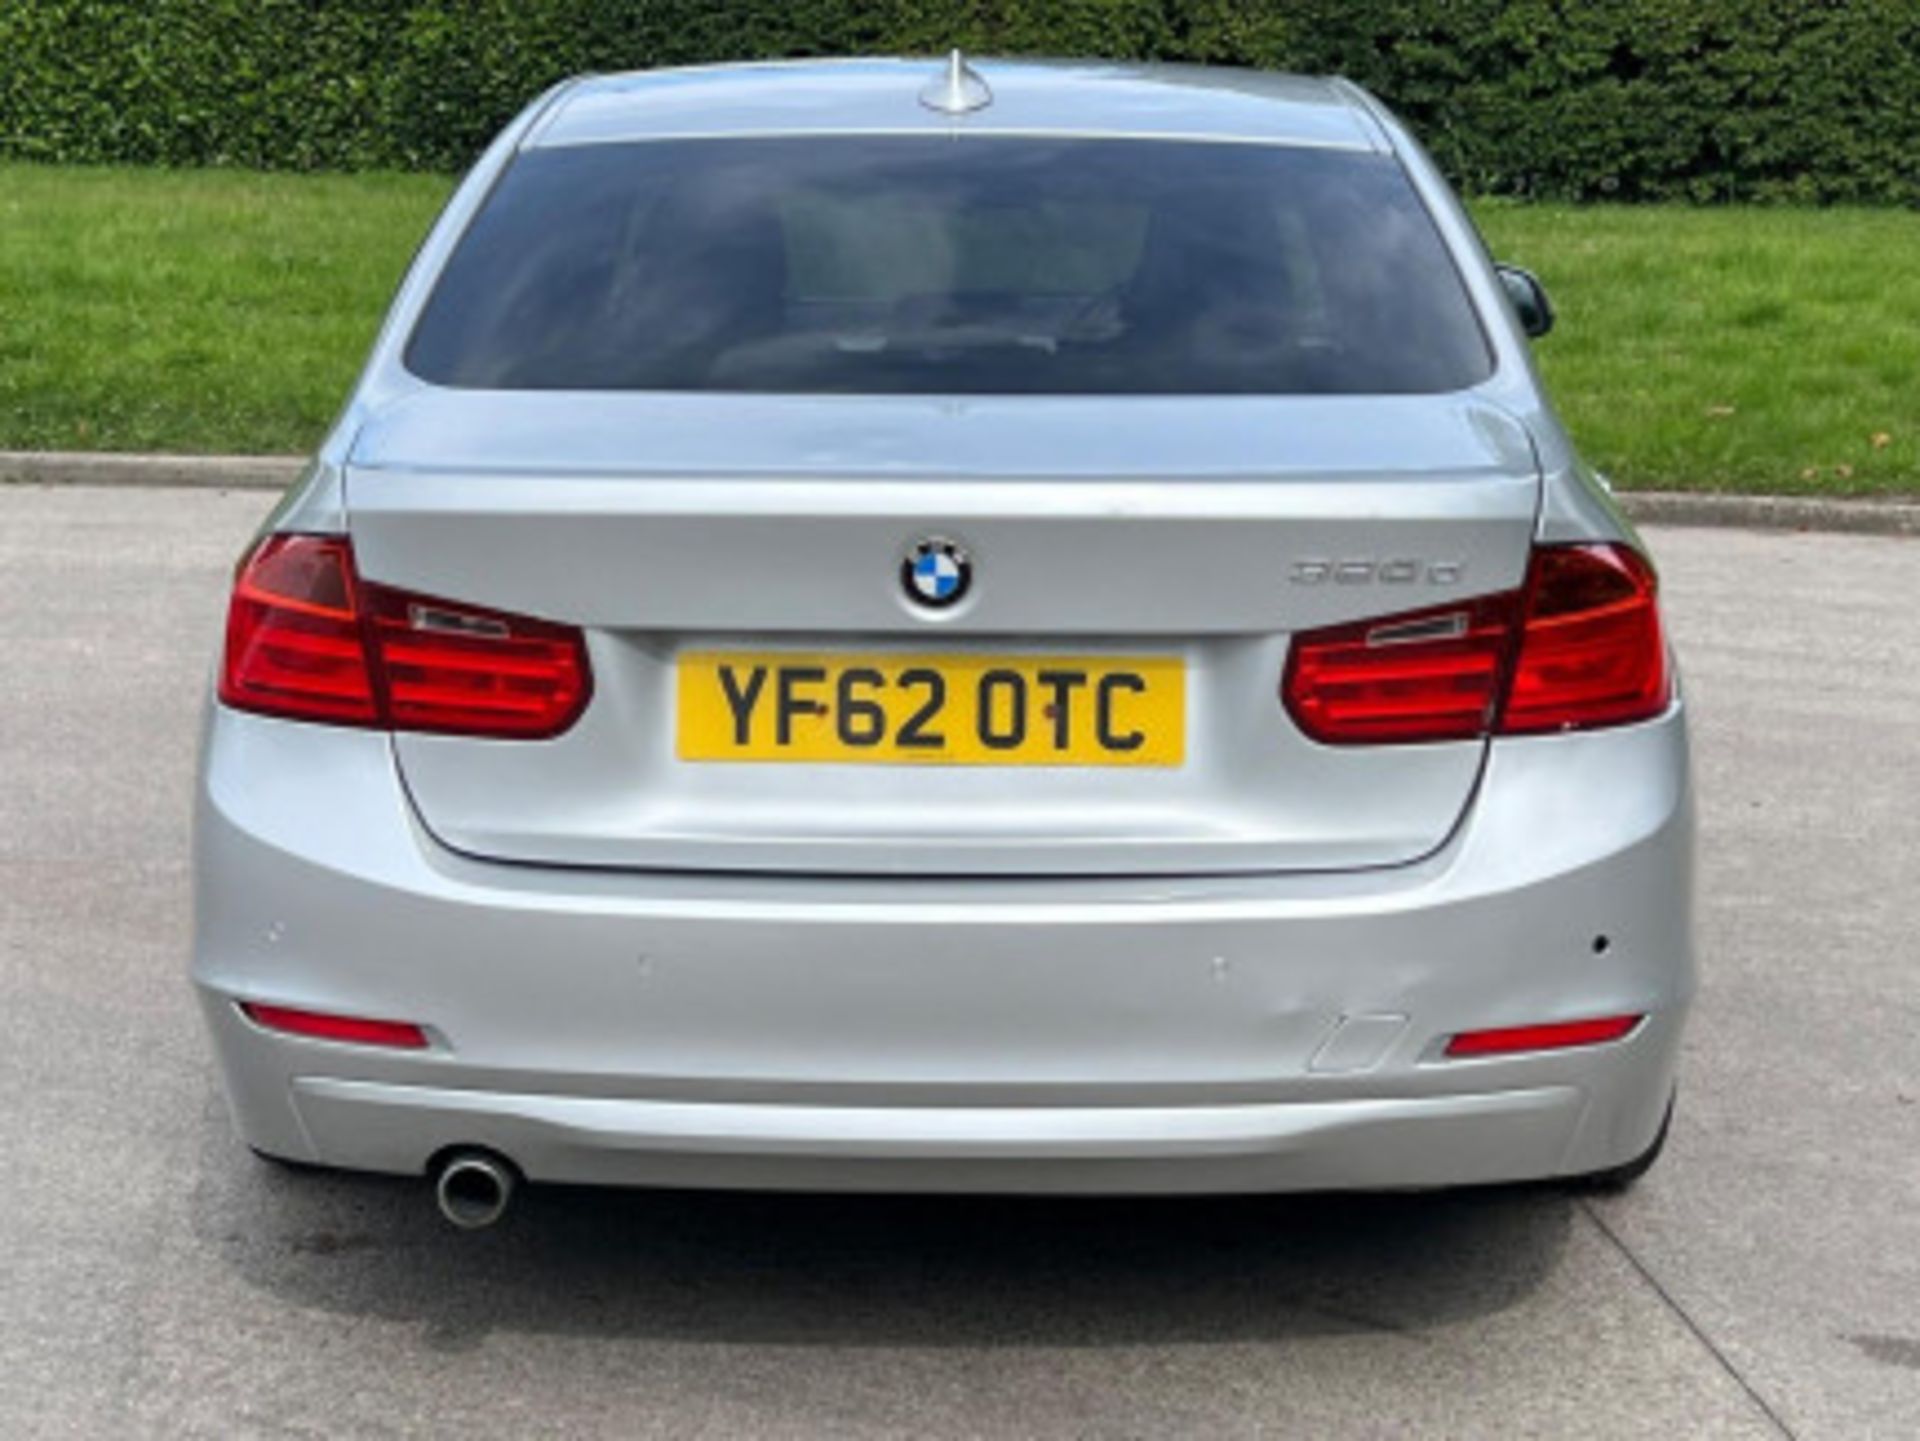 BMW 3 SERIES 2.0 DIESEL ED START STOP - A WELL-MAINTAINED GEM >>--NO VAT ON HAMMER--<< - Image 114 of 229